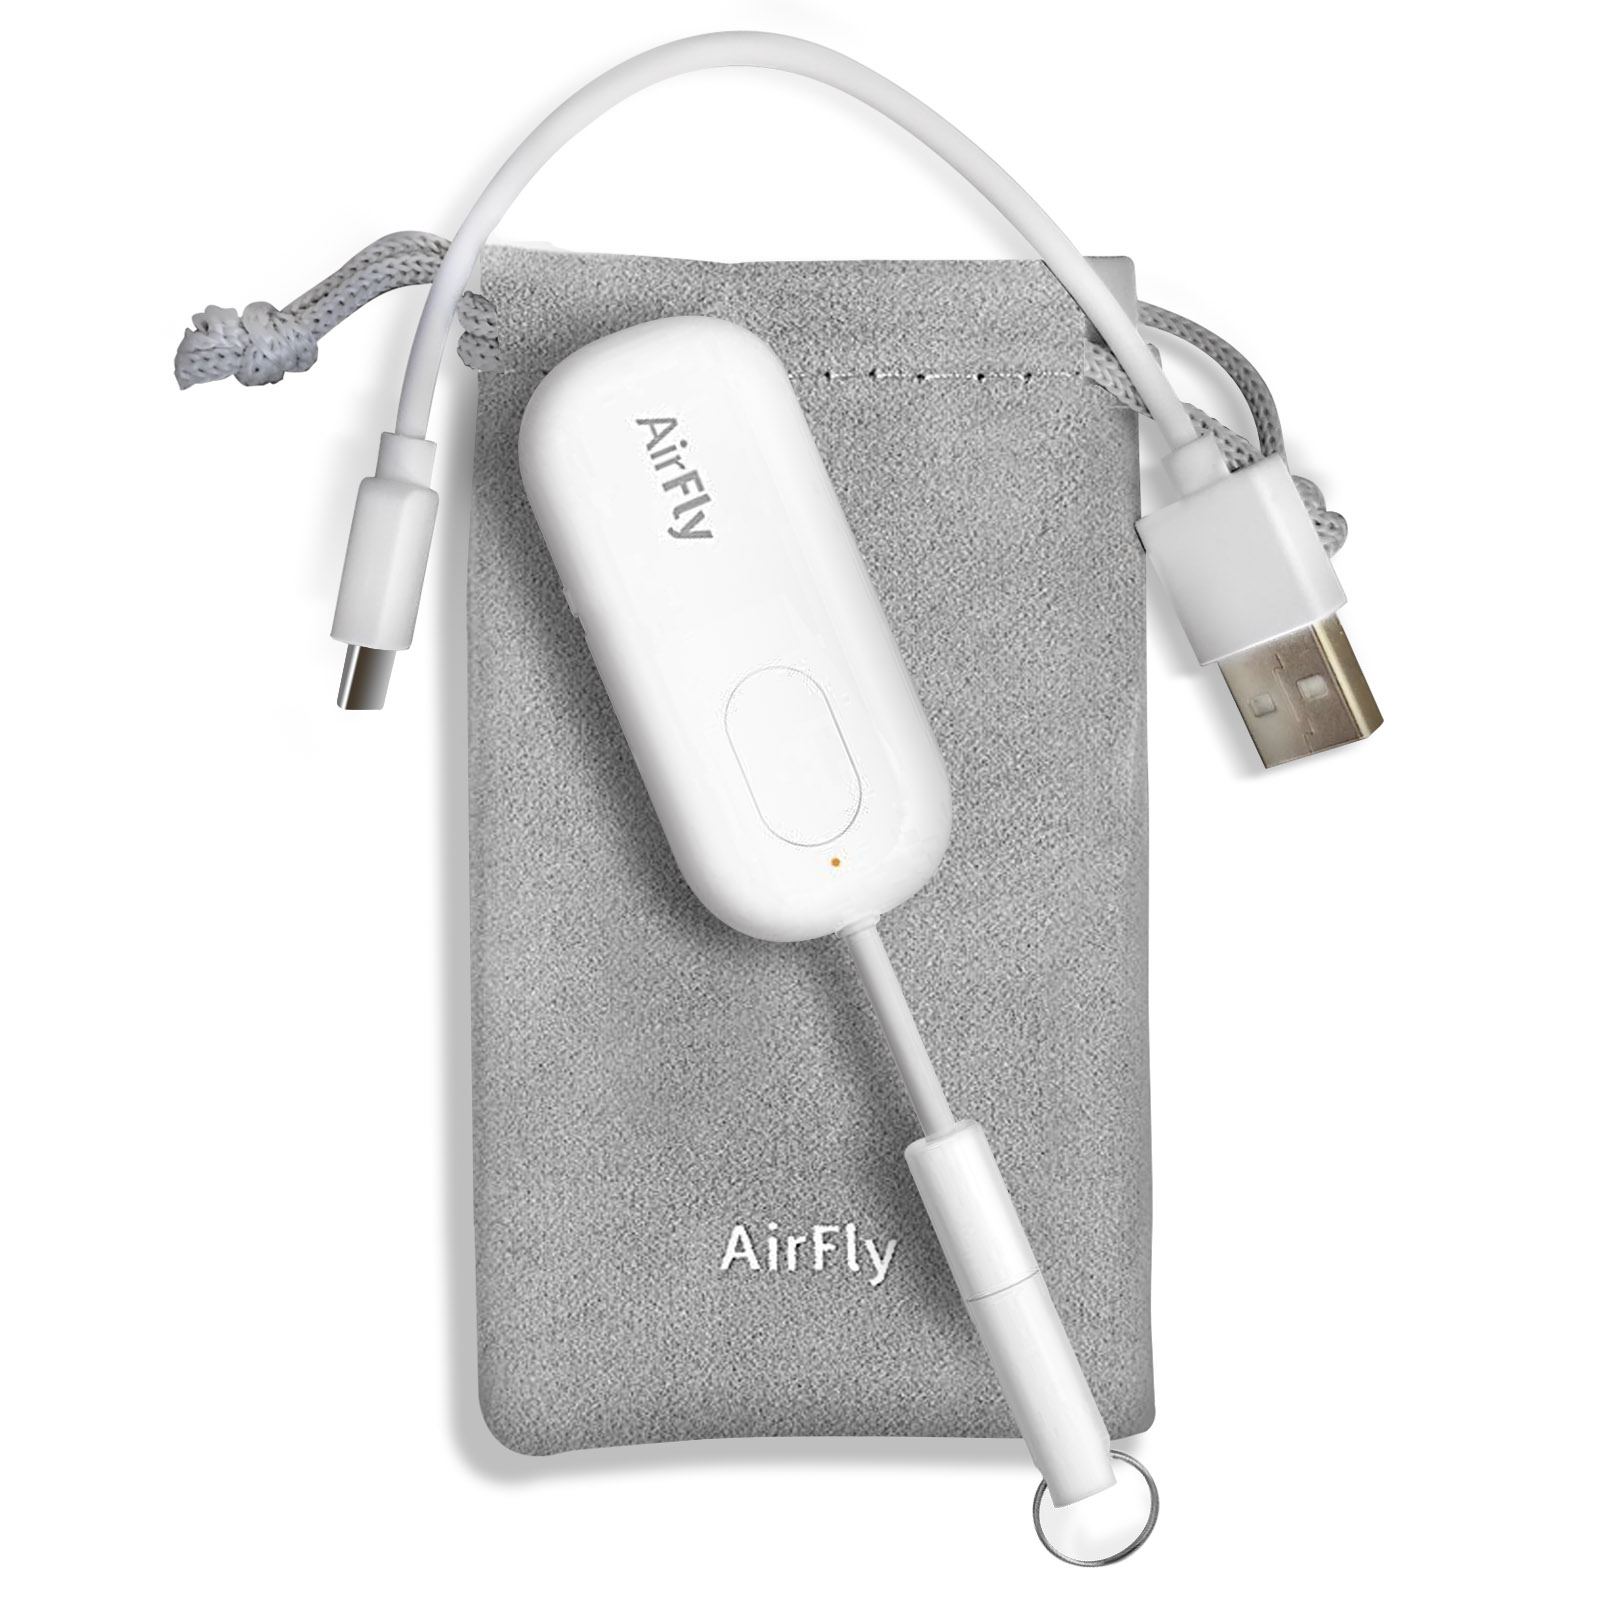 TWELVE Bluetooth SOUTH Transmitter Audio Airfly Pro